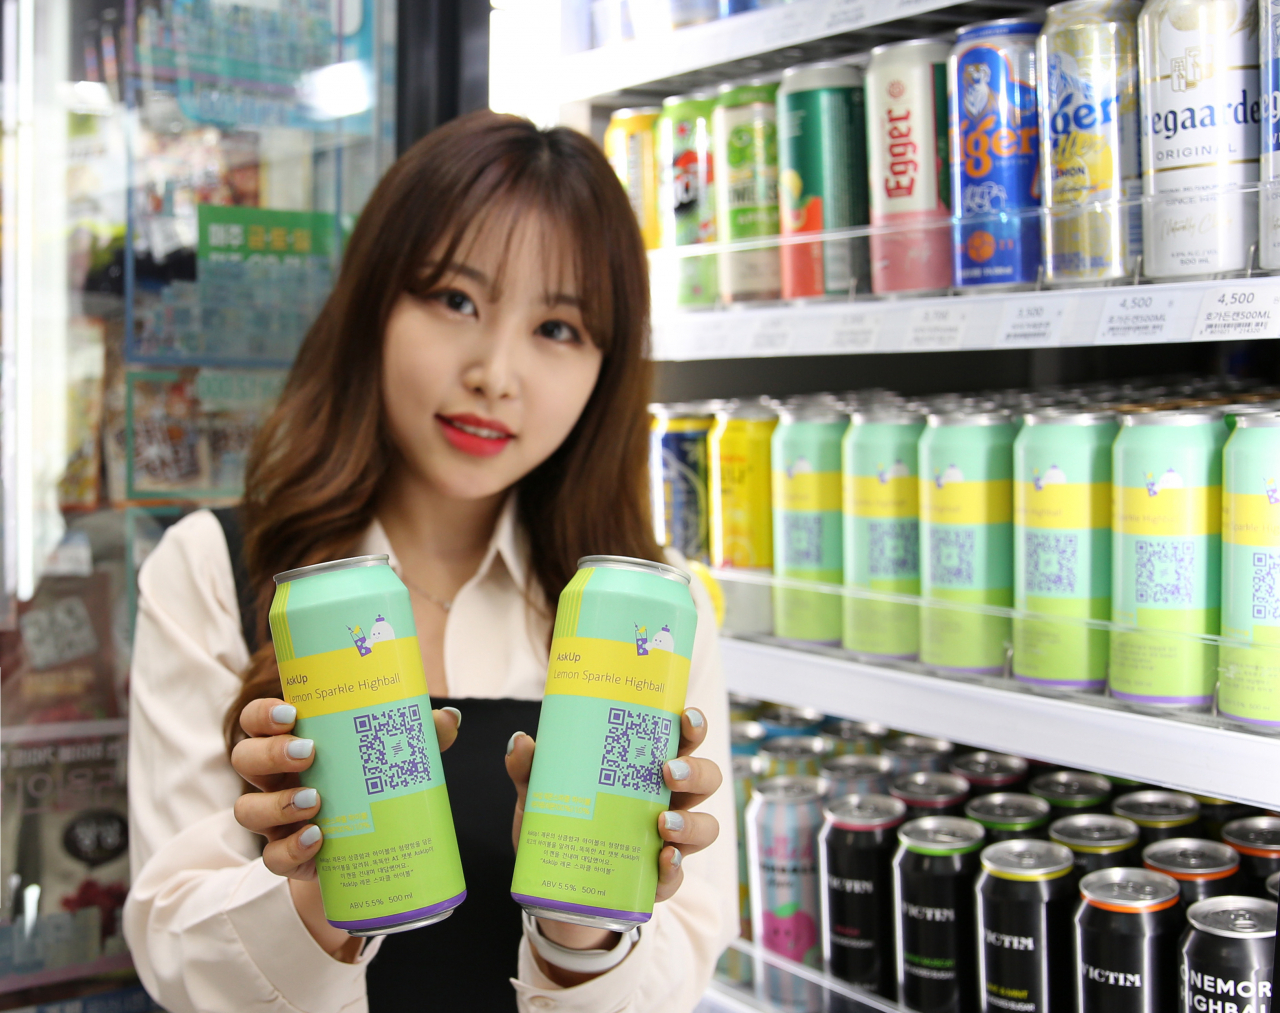 A model holds up cans of AskUp Lemon Sparkling Highball at a GS25 convenience store. (GS25)